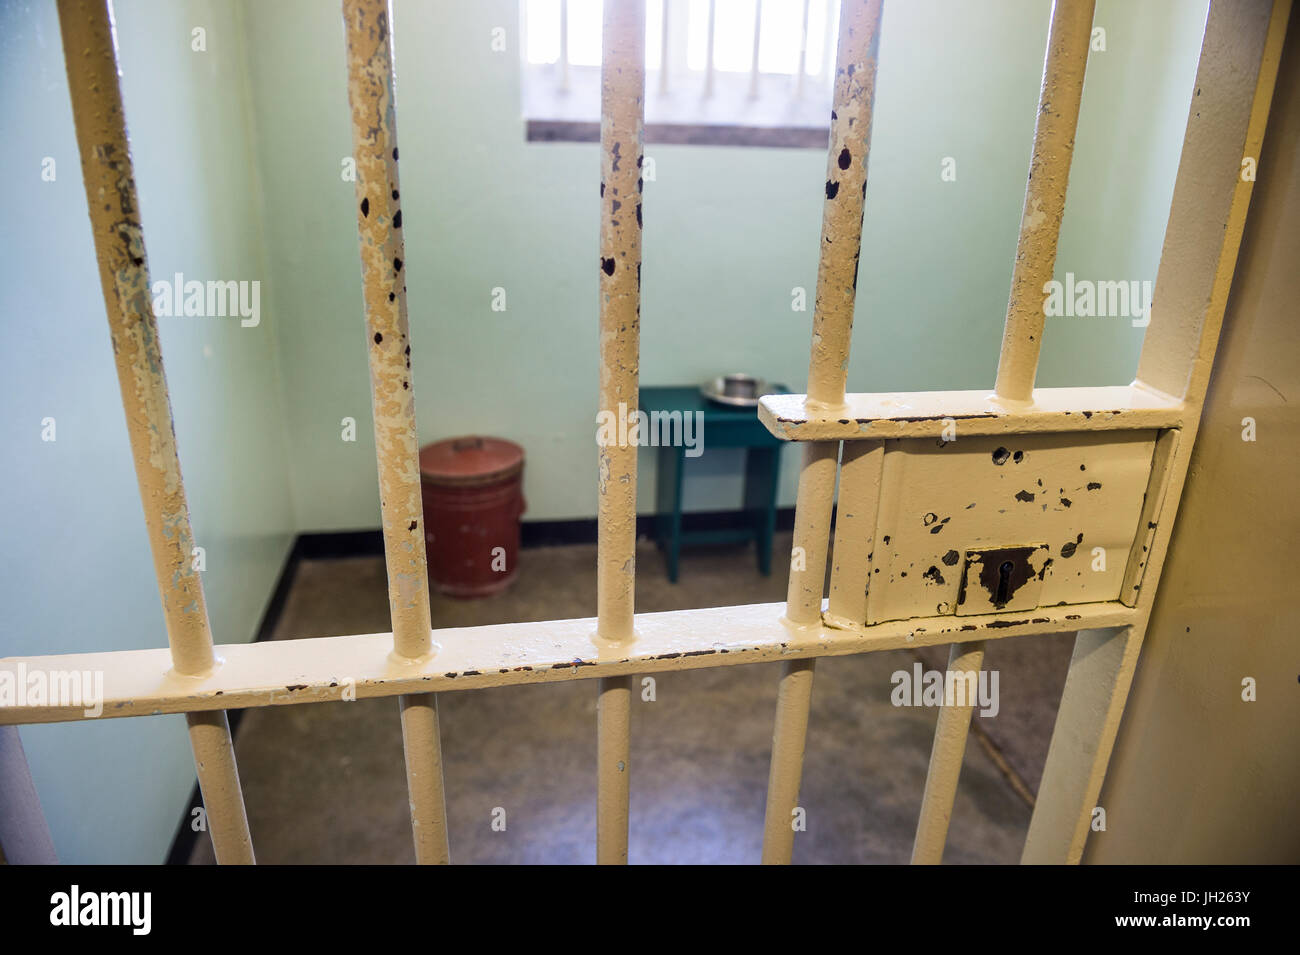 Prison cell of Nelson Mandela in the former prison on Robben Island, UNESCO World Heritage Site, South Africa, Africa Stock Photo